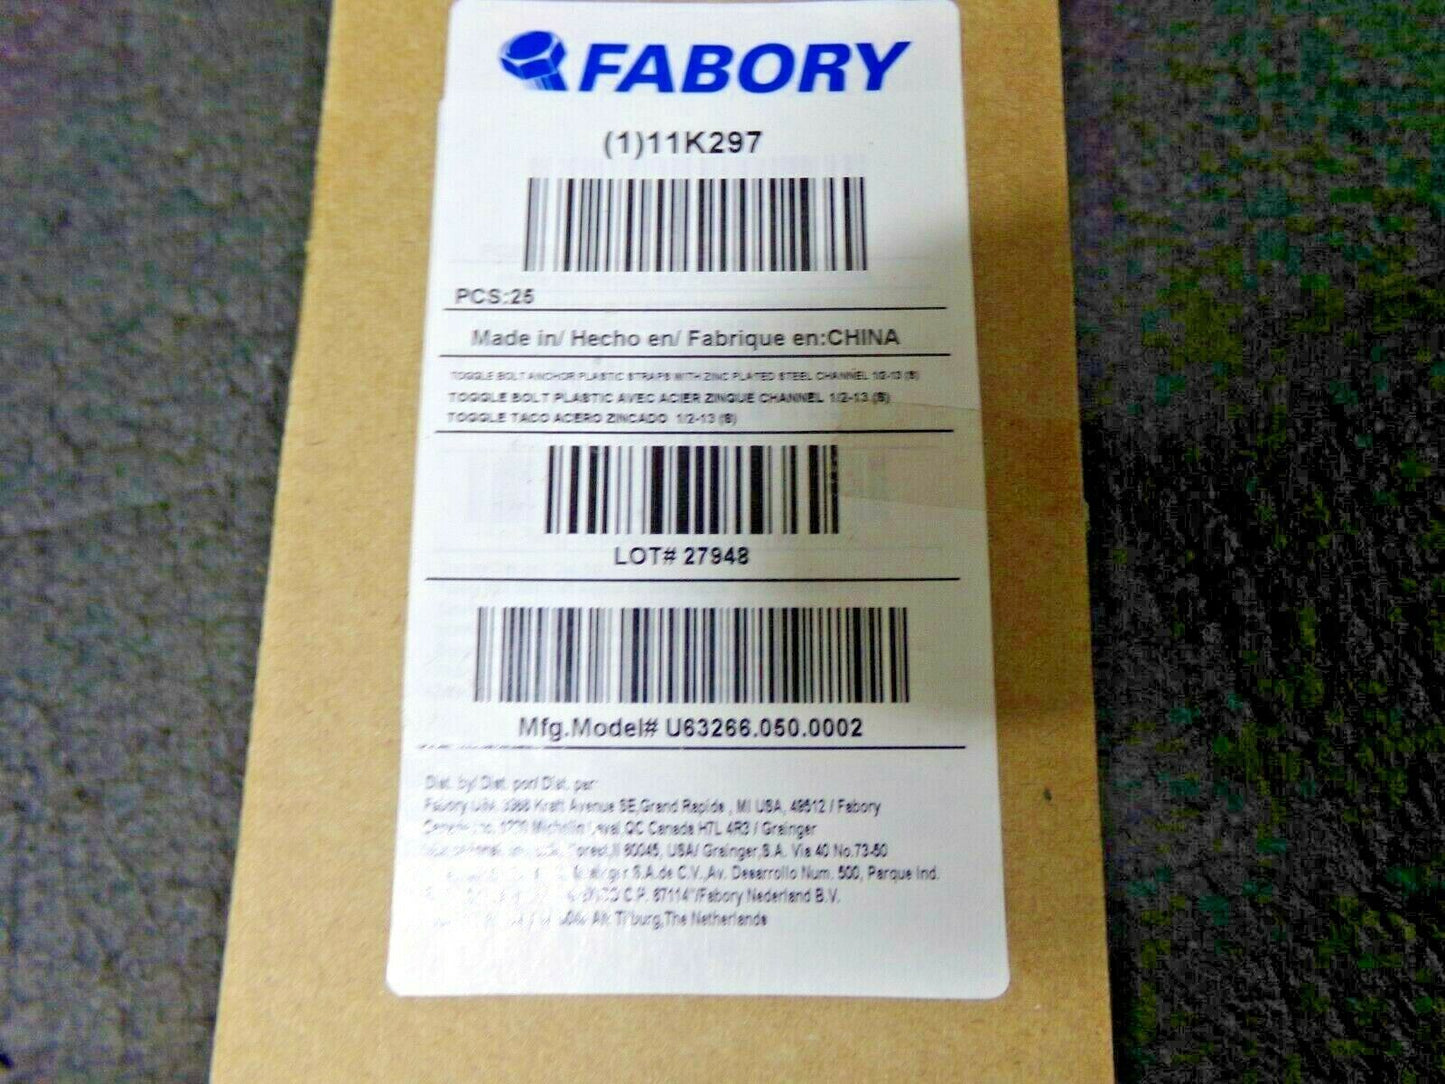 FABORY Steel Channel Toggle Anchor, 1/2"-13 Anchor Thread Size, 25 PK (183962719092-NBT26)